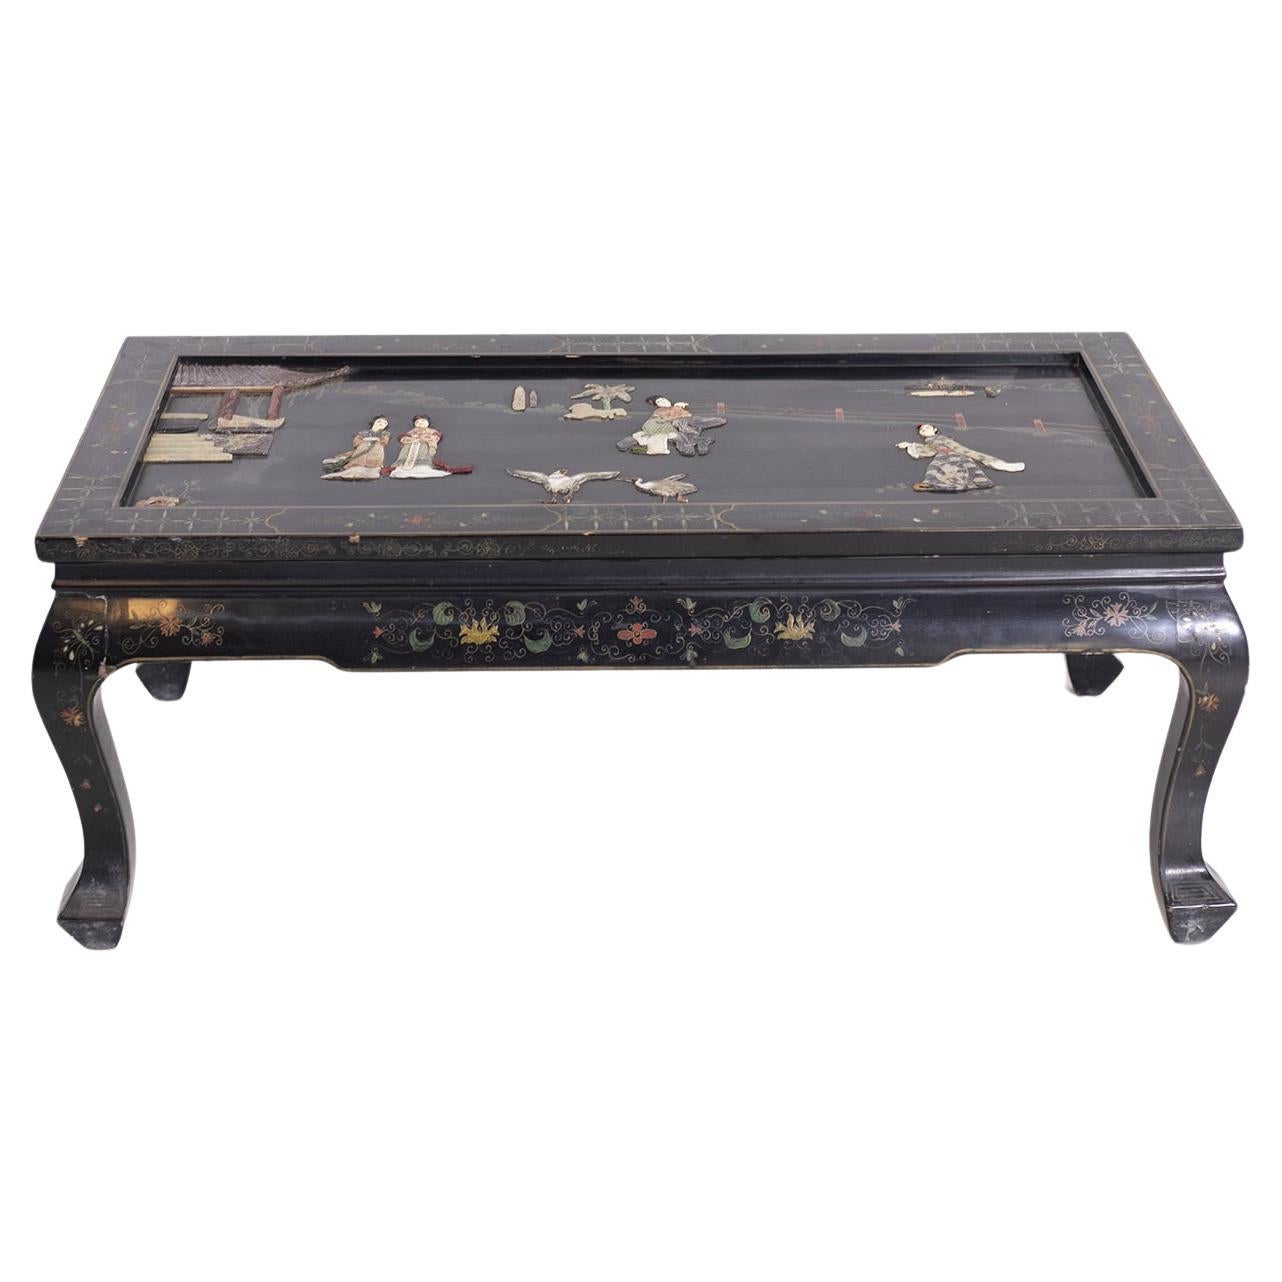 Vintage Chinese Coffee Table Inlaid Wood and Stones